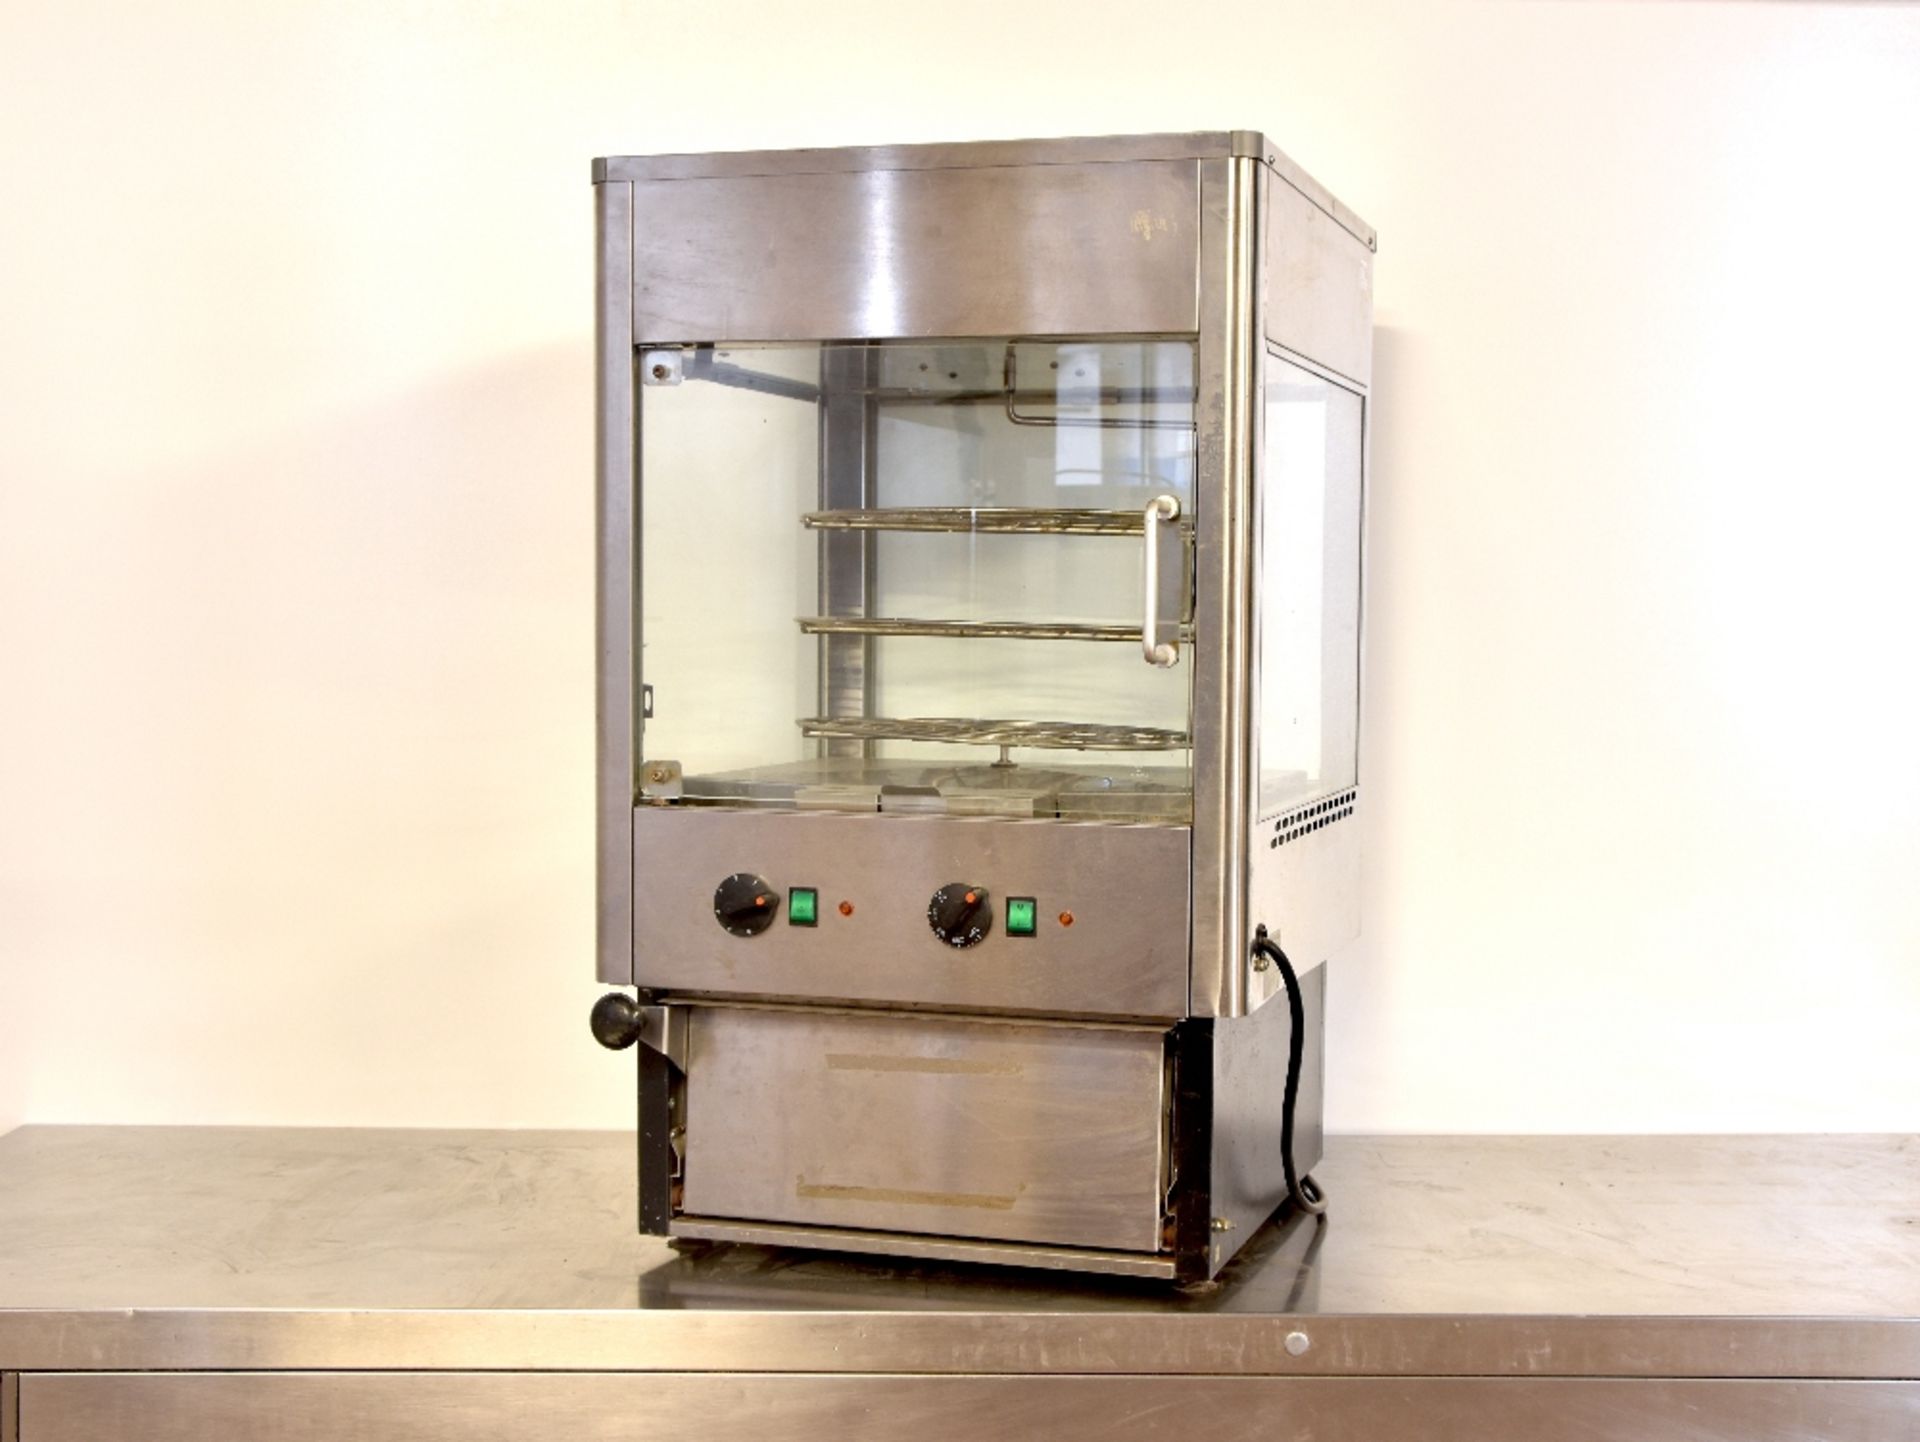 Lincat Pizza Oven + Hot Rotating Display Cabinet 3 Shelves -1ph - Tested Working